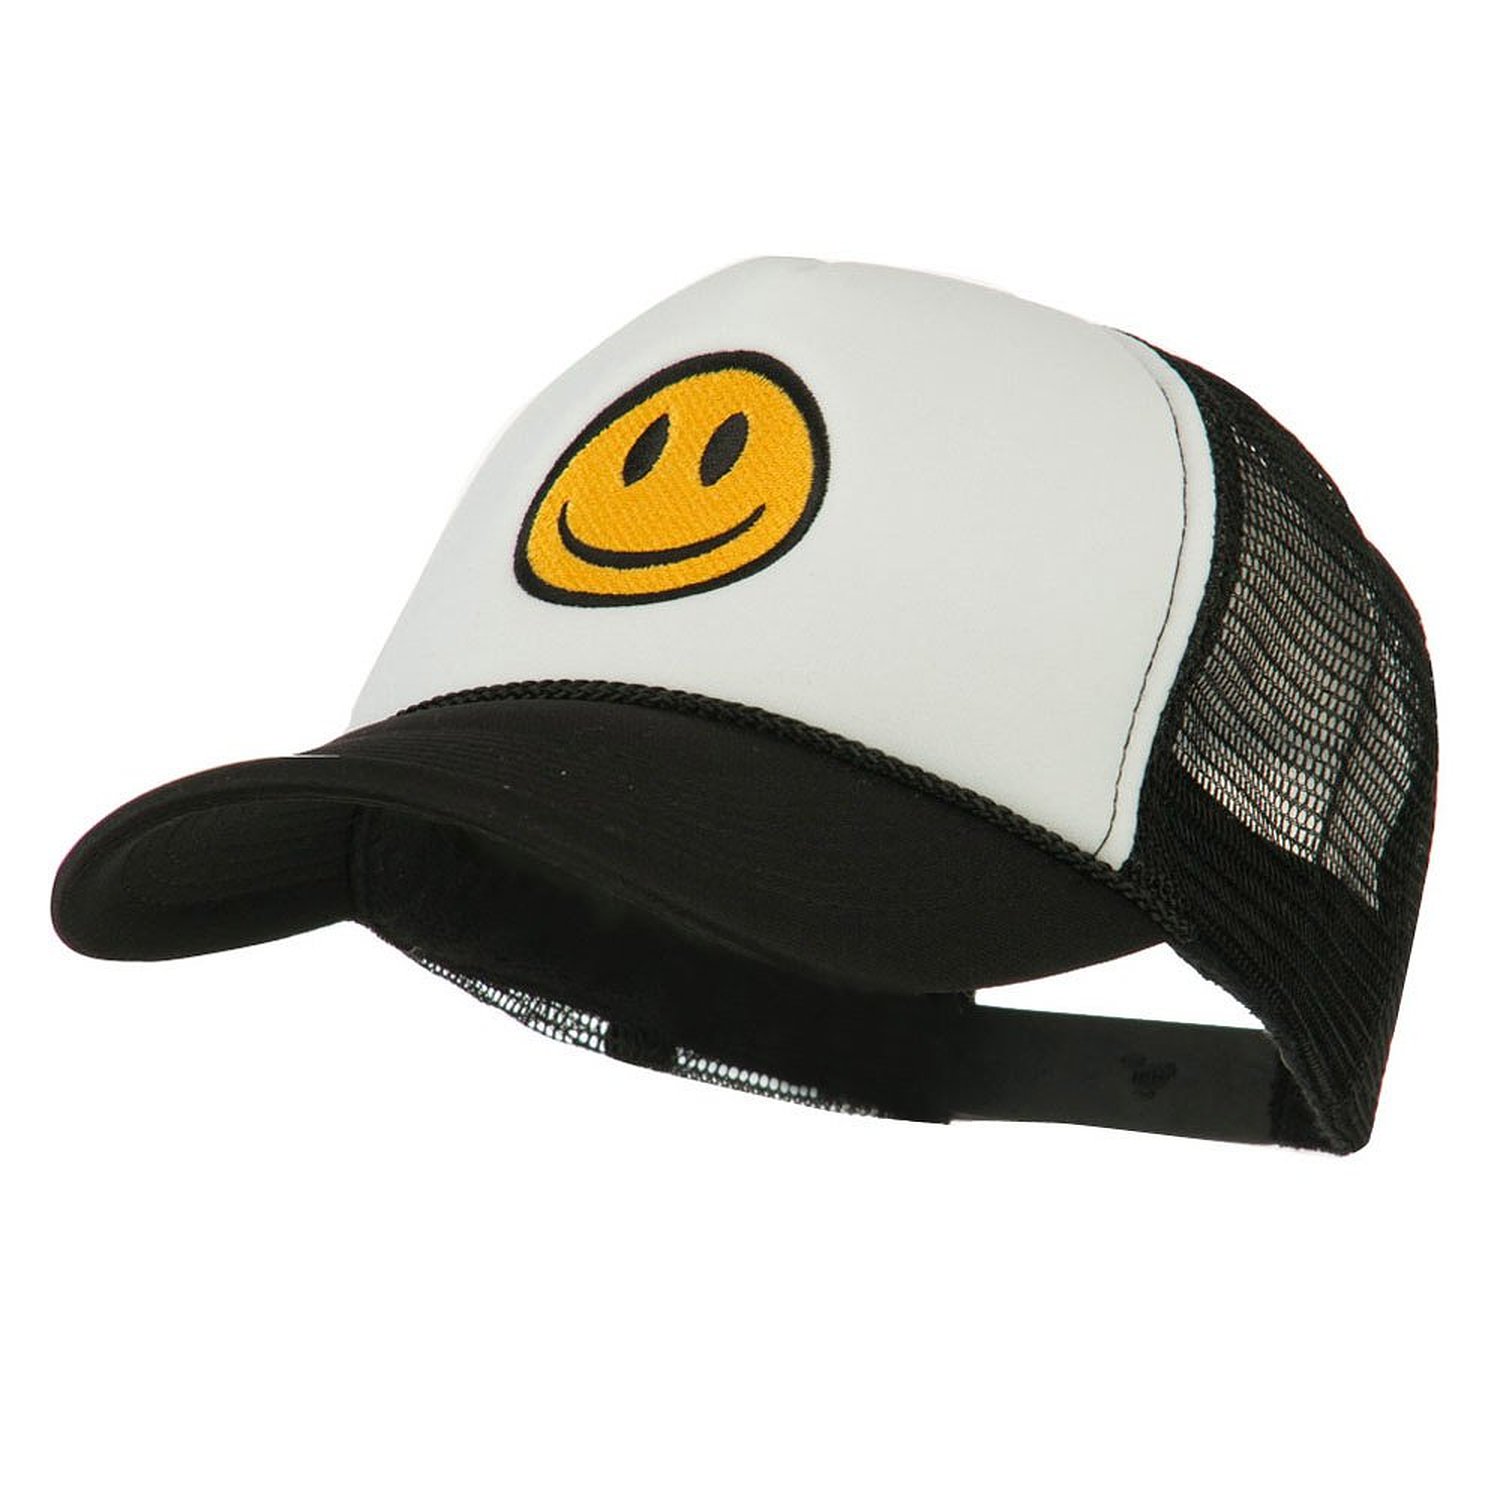 Smiley Face Embroidered Foam Mesh Back Cap - Black White